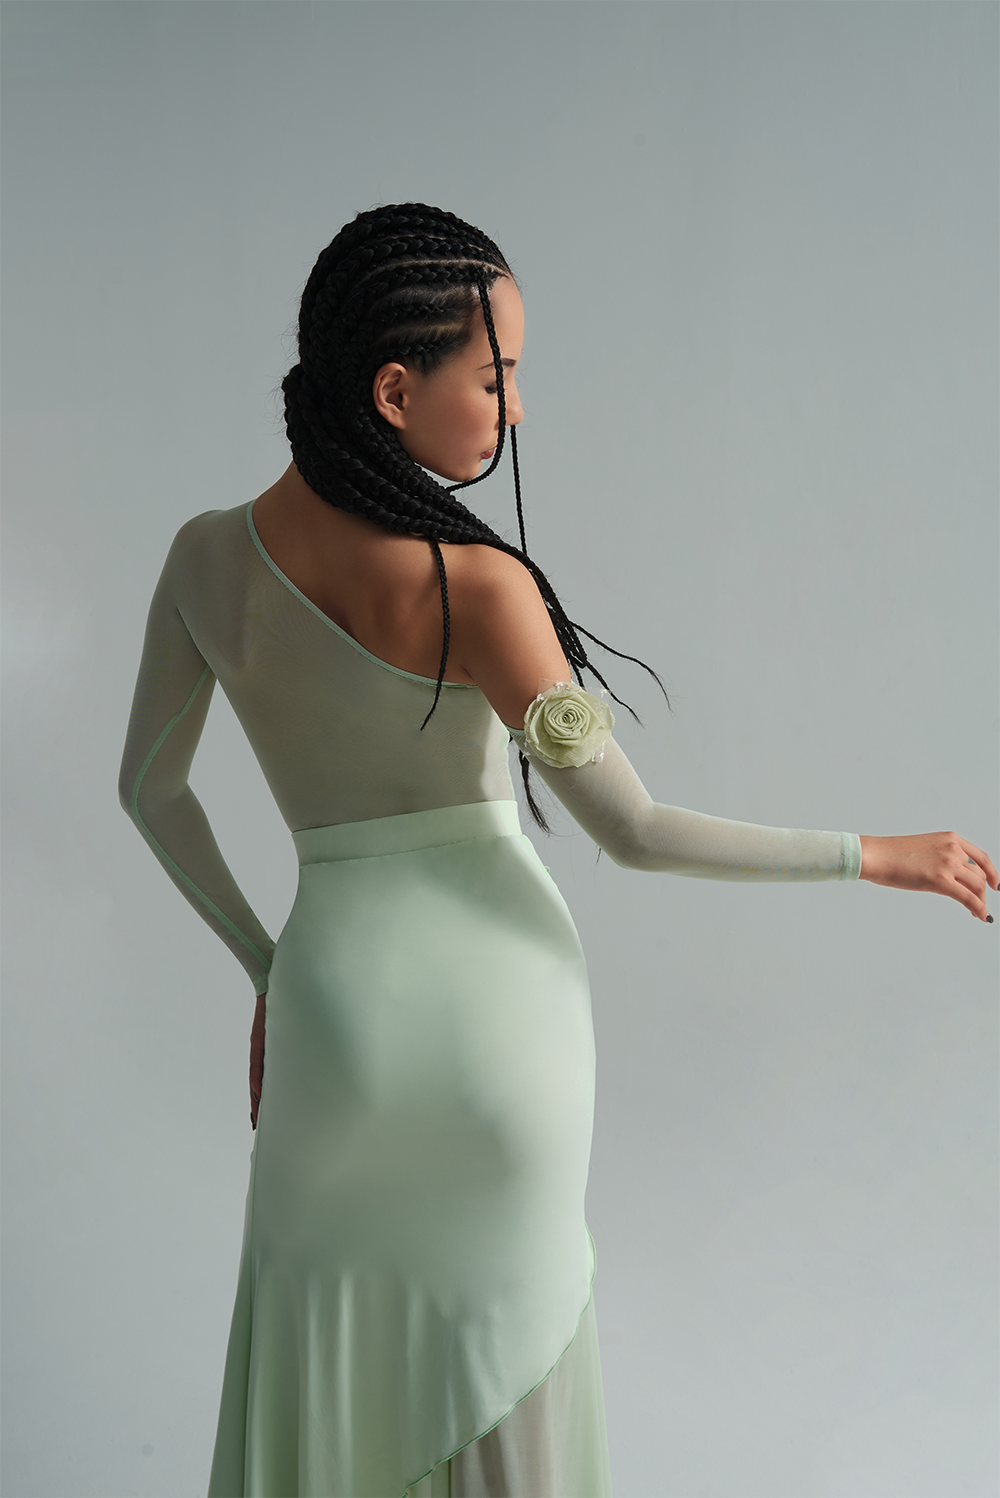 Experience the passion of dance with the DANCE QUEEN 656-3 Mint Mambo Leotard. The off shoulder design and delicate flower details add a touch of elegance, while the long sleeves provide coverage and movement. Feel confident and stylish while performing your best in this ballroom leotard.